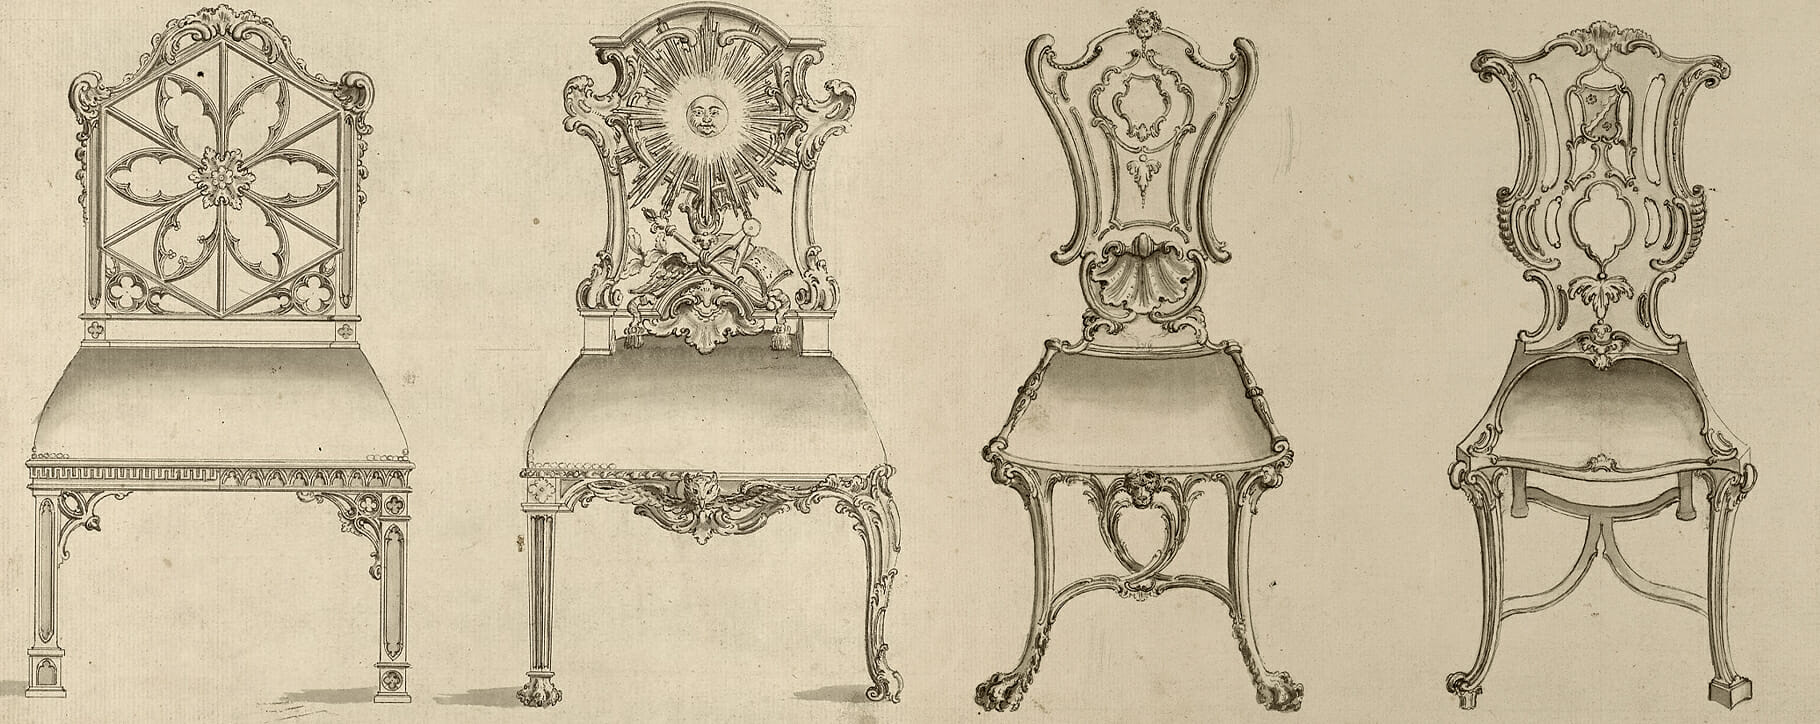 Chippendale chair designs 2